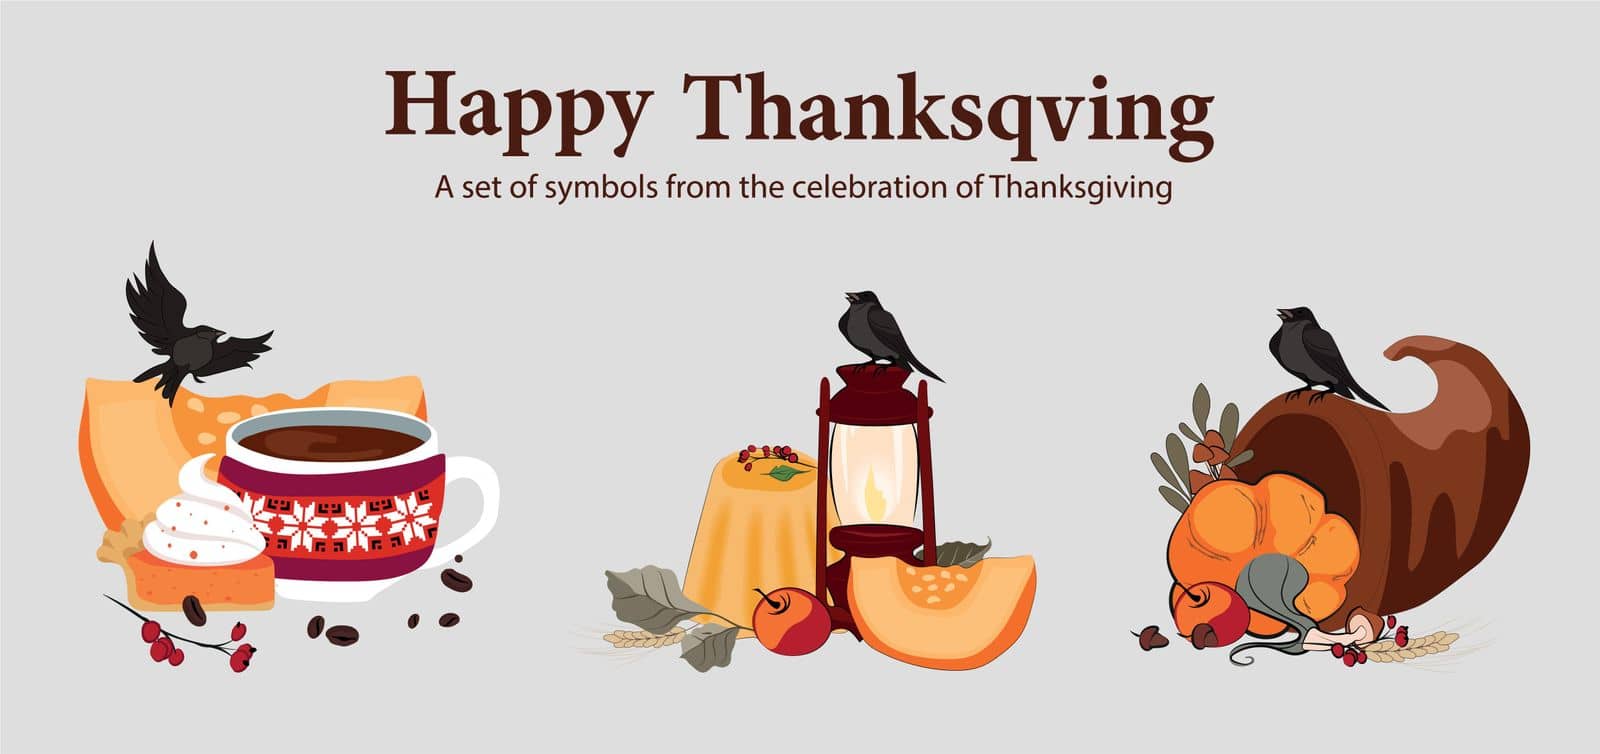 Thanksgiving holiday design template for websites by milastokerpro